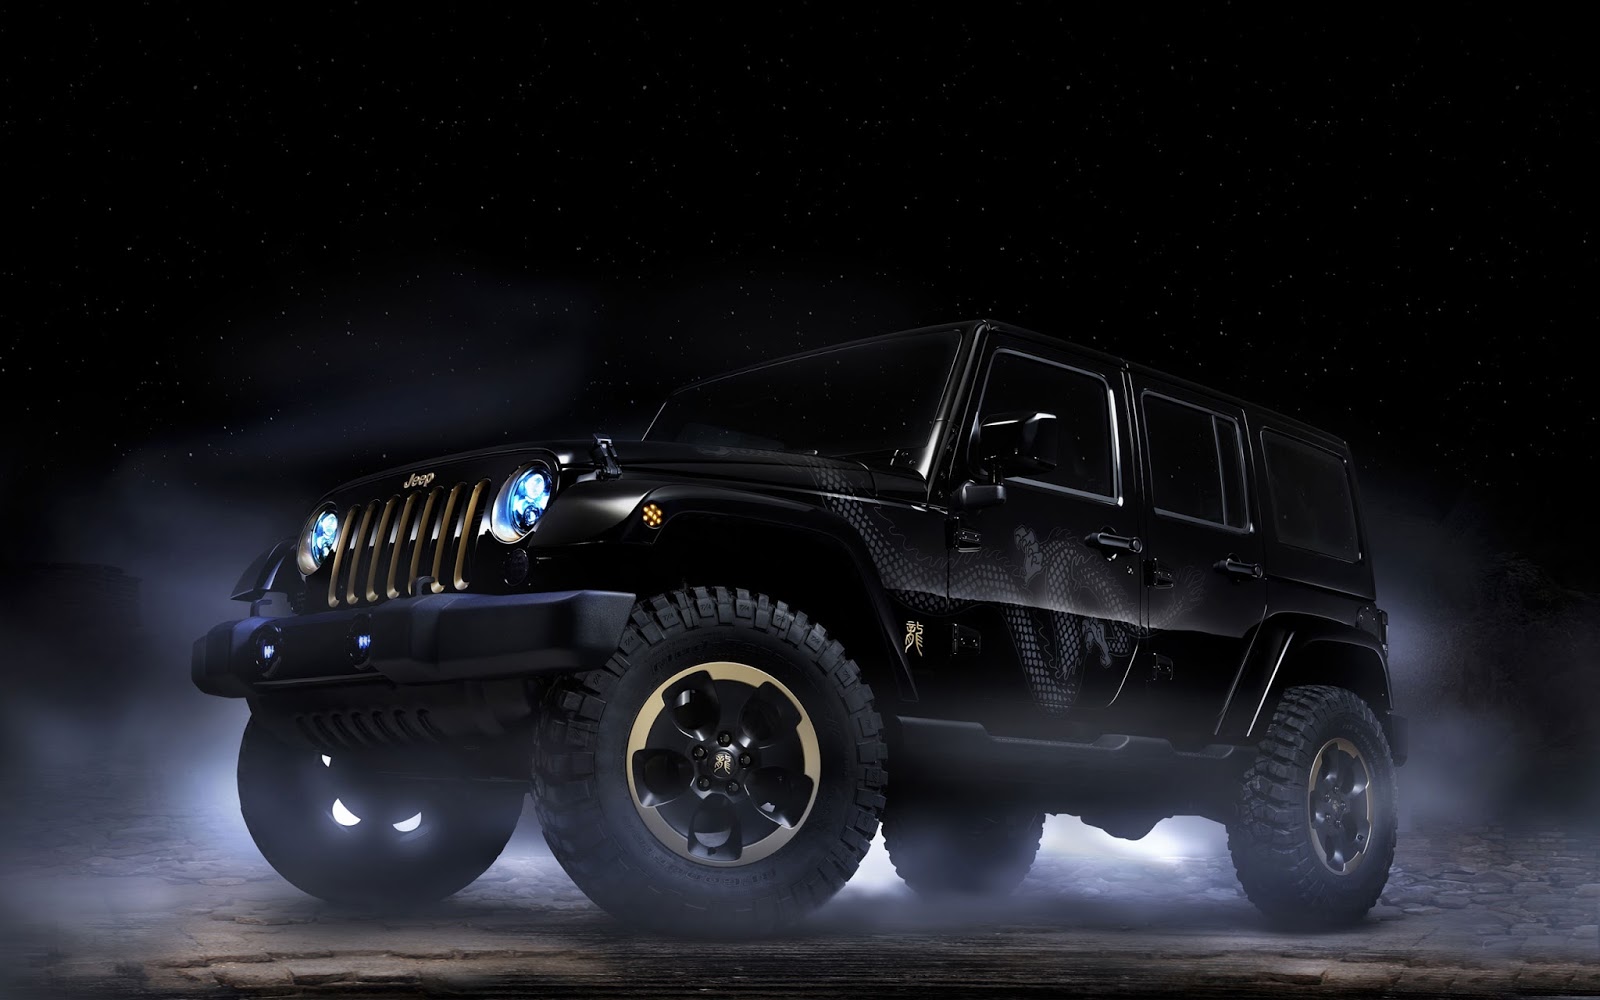 Jeep Wrangler HD Wallpaper Cool Pictures